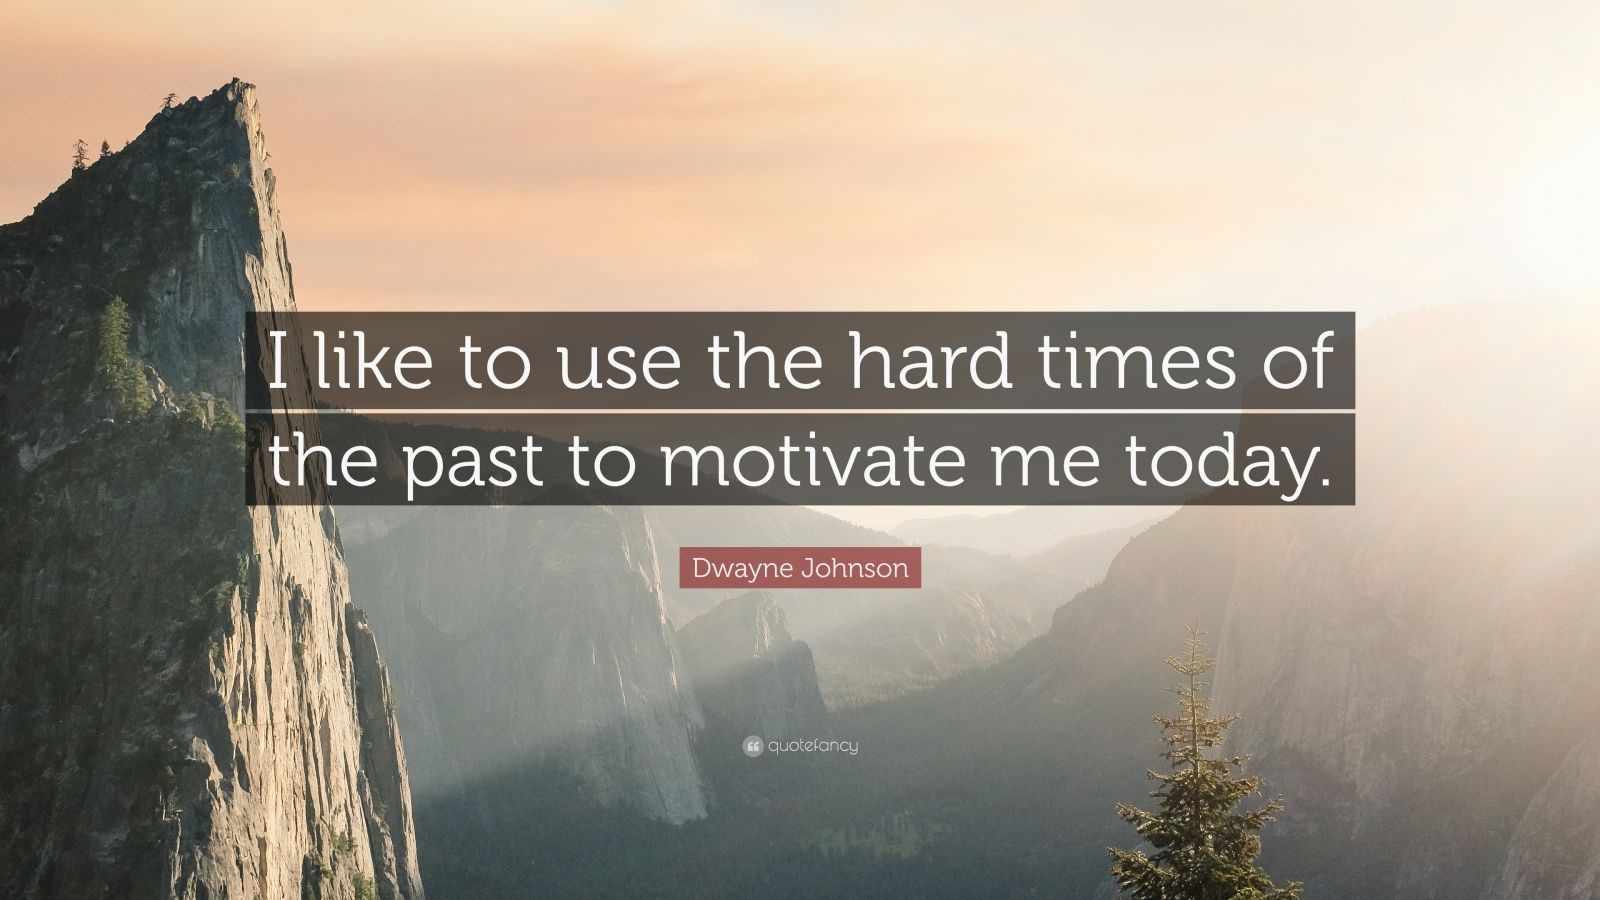 Dwayne Johnson Quote: “I like to use the hard times of the past to motivate  me today.”